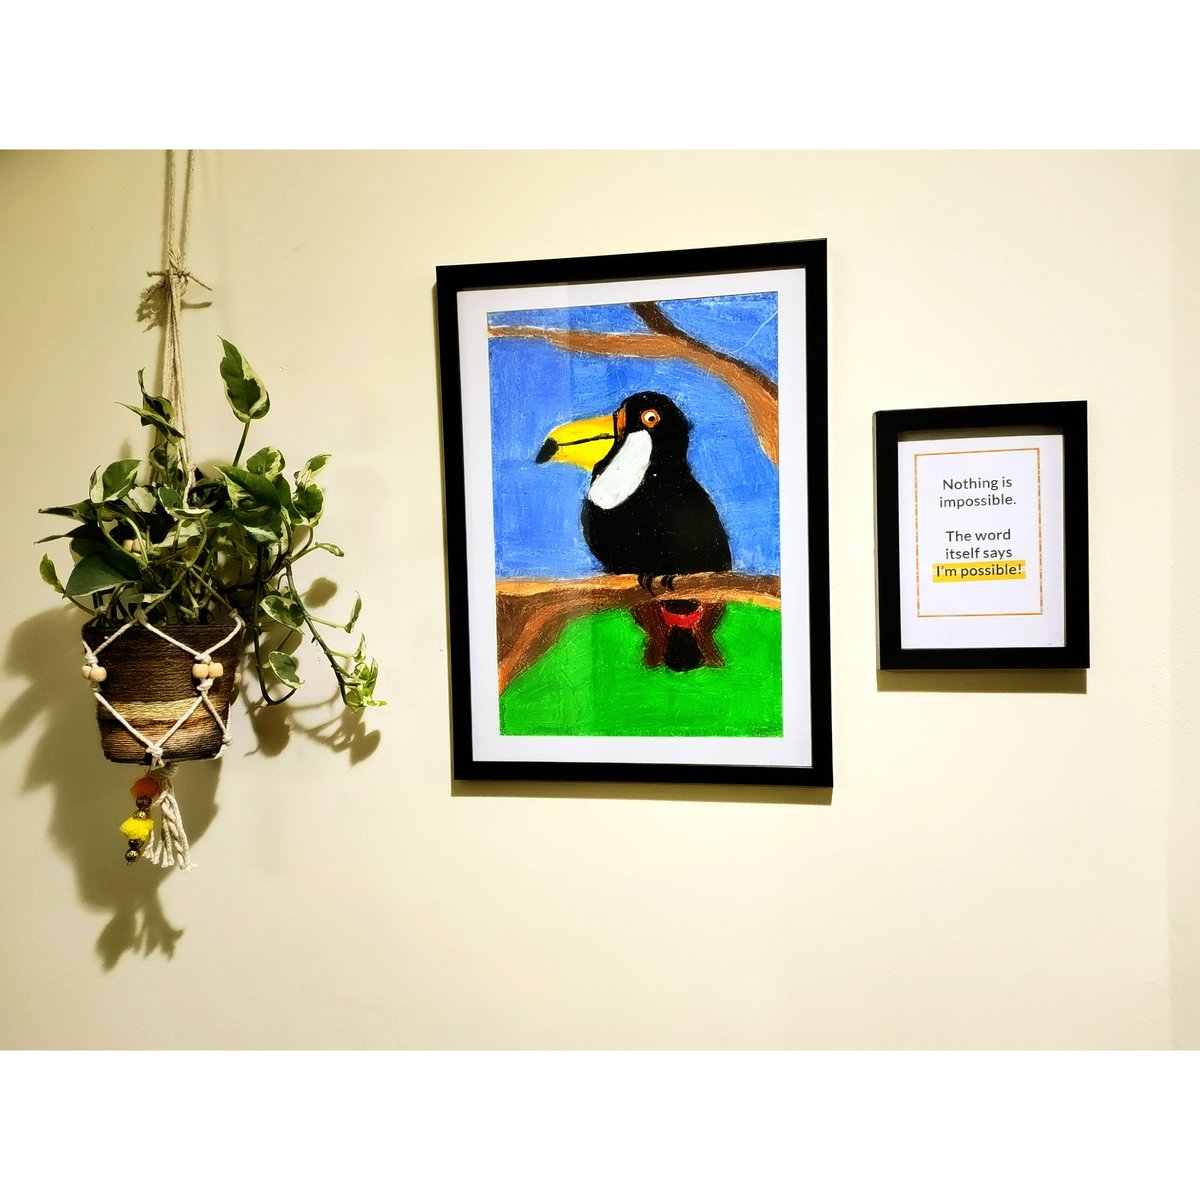 This toucan is now a part of our home 🏠

#artwork #childart #artclass #symbolism #toucan #wisdom #happiness #goodluck #sweethome